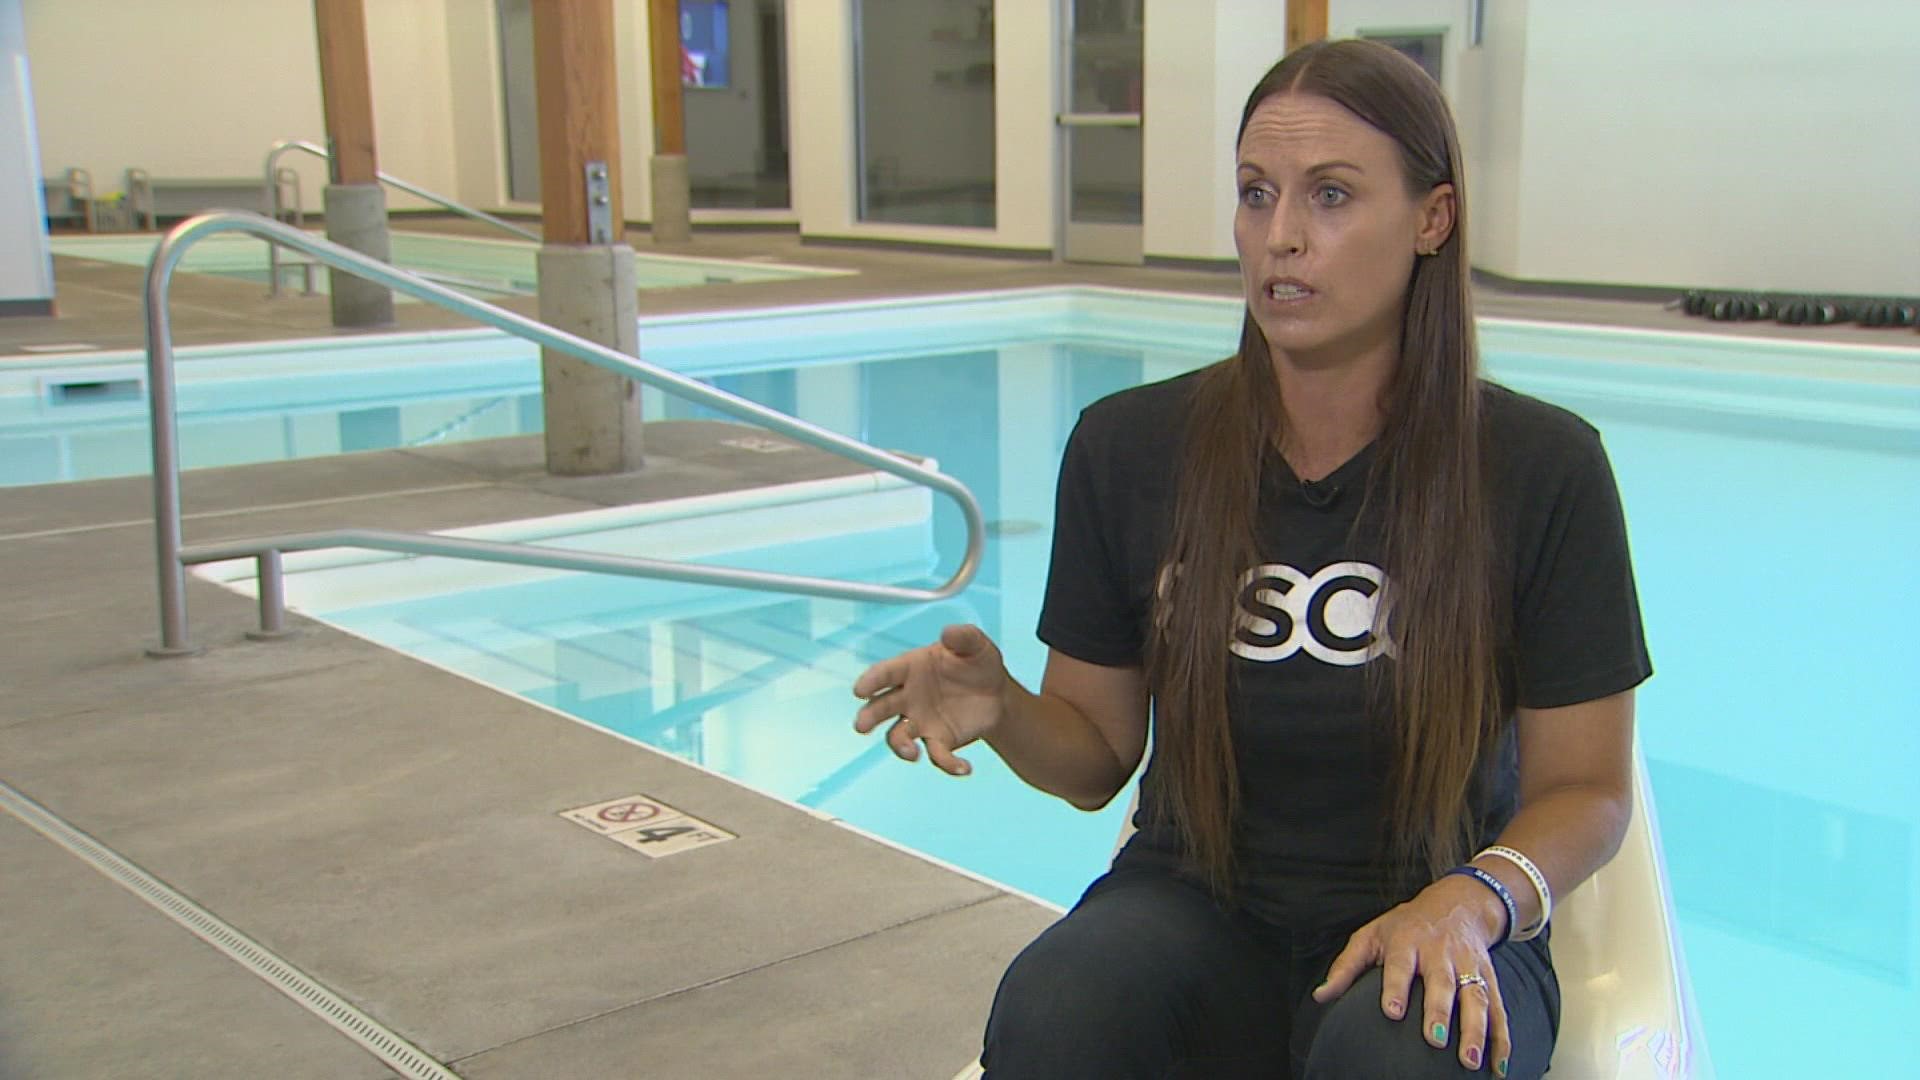 Olympian Amanda Beard, who lives in Gig Harbor, won her first gold medal at the age of 14, and says she understands the intense mental pressure it takes to compete.